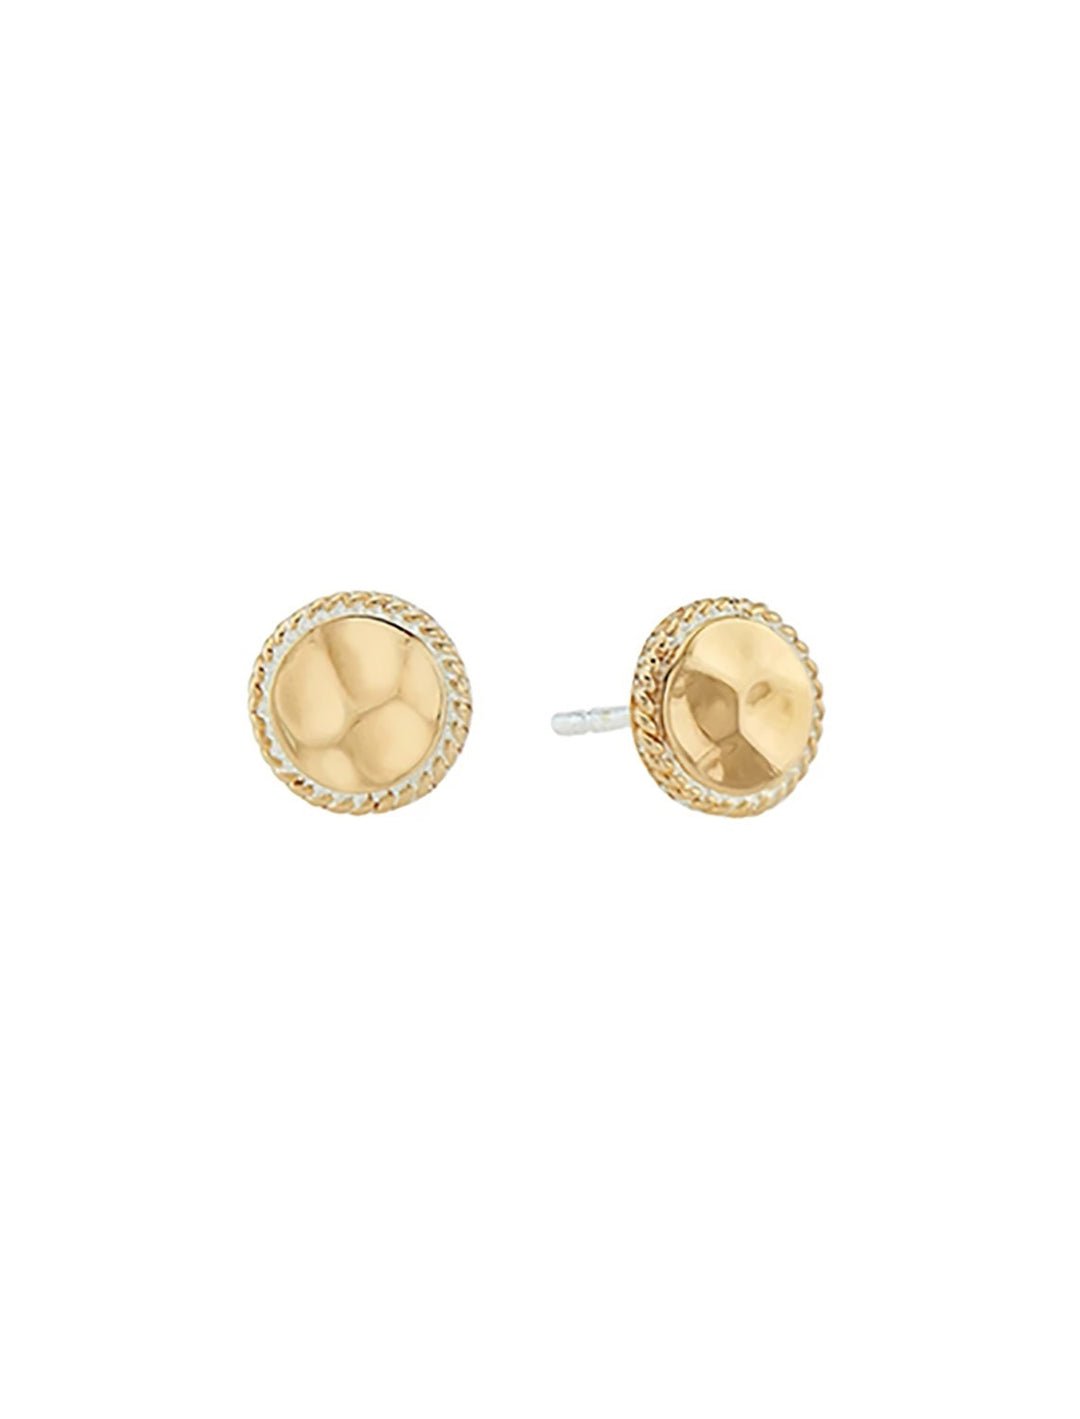 hammered studs in gold